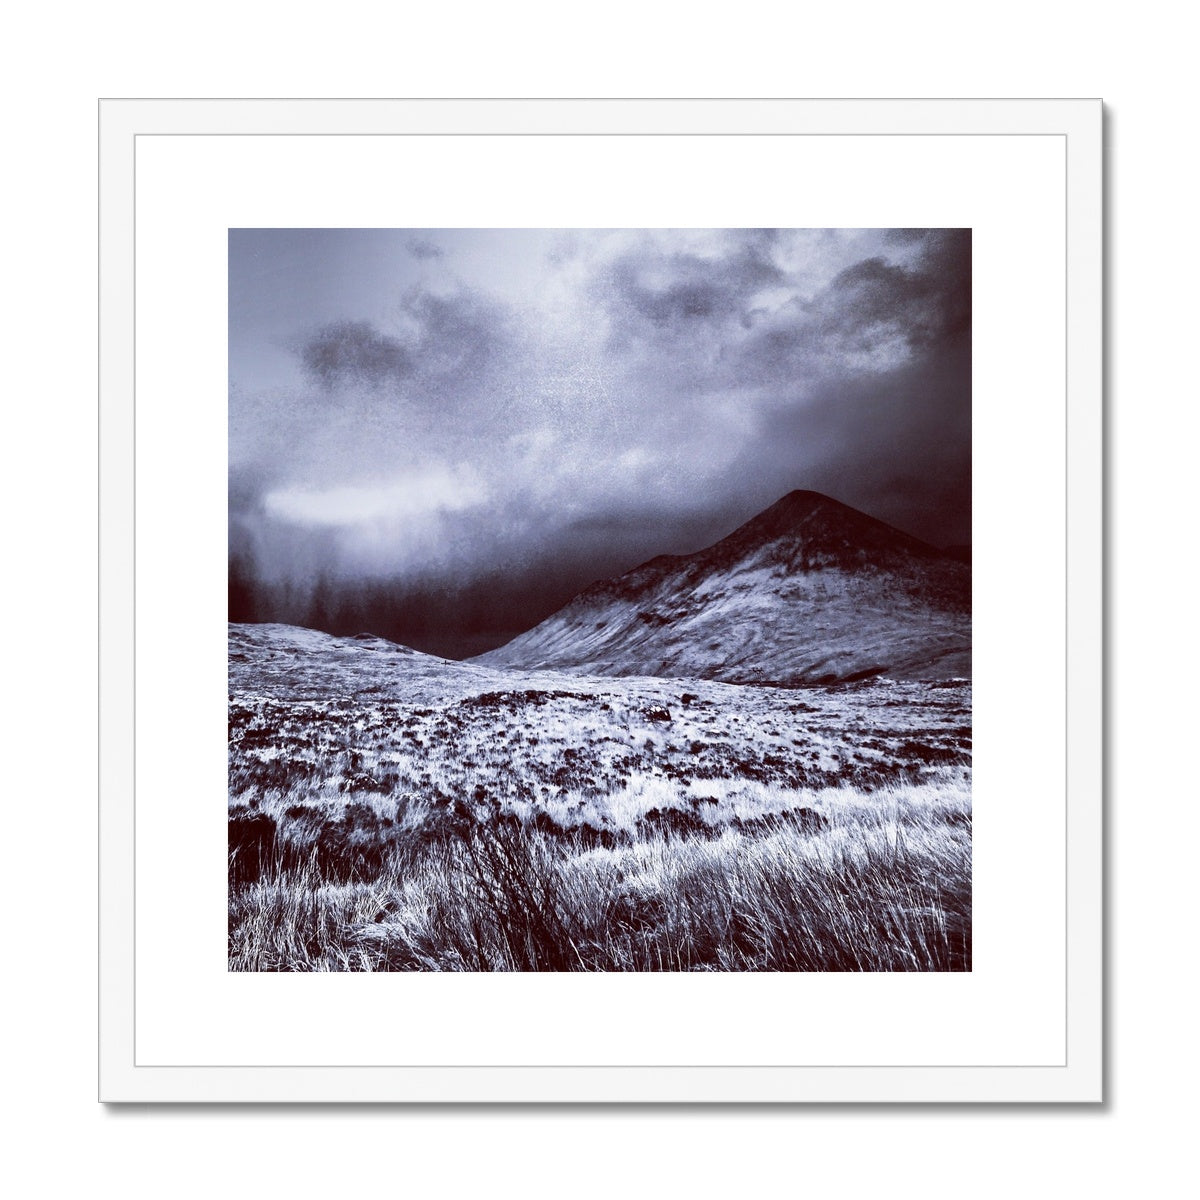 A Brooding Glen Varagil Skye Painting | Framed & Mounted Prints From Scotland-Framed & Mounted Prints-Skye Art Gallery-20"x20"-White Frame-Paintings, Prints, Homeware, Art Gifts From Scotland By Scottish Artist Kevin Hunter